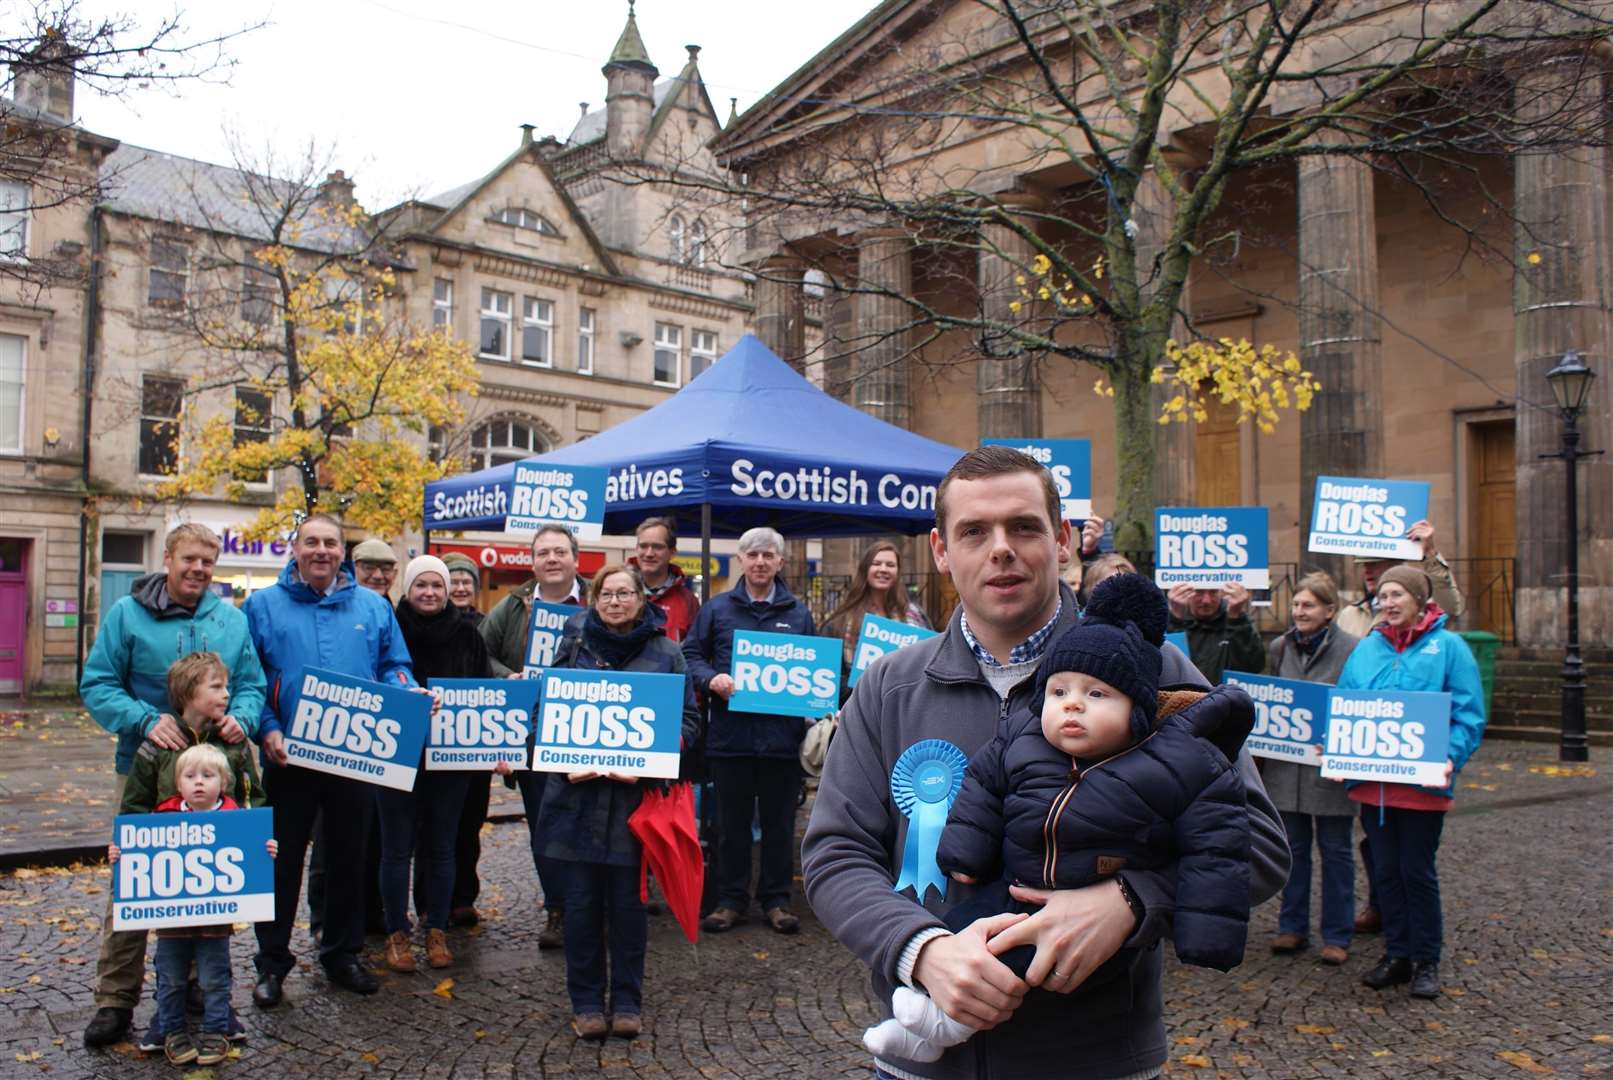 Douglas Ross with his son Alistair and Conservative supporters.